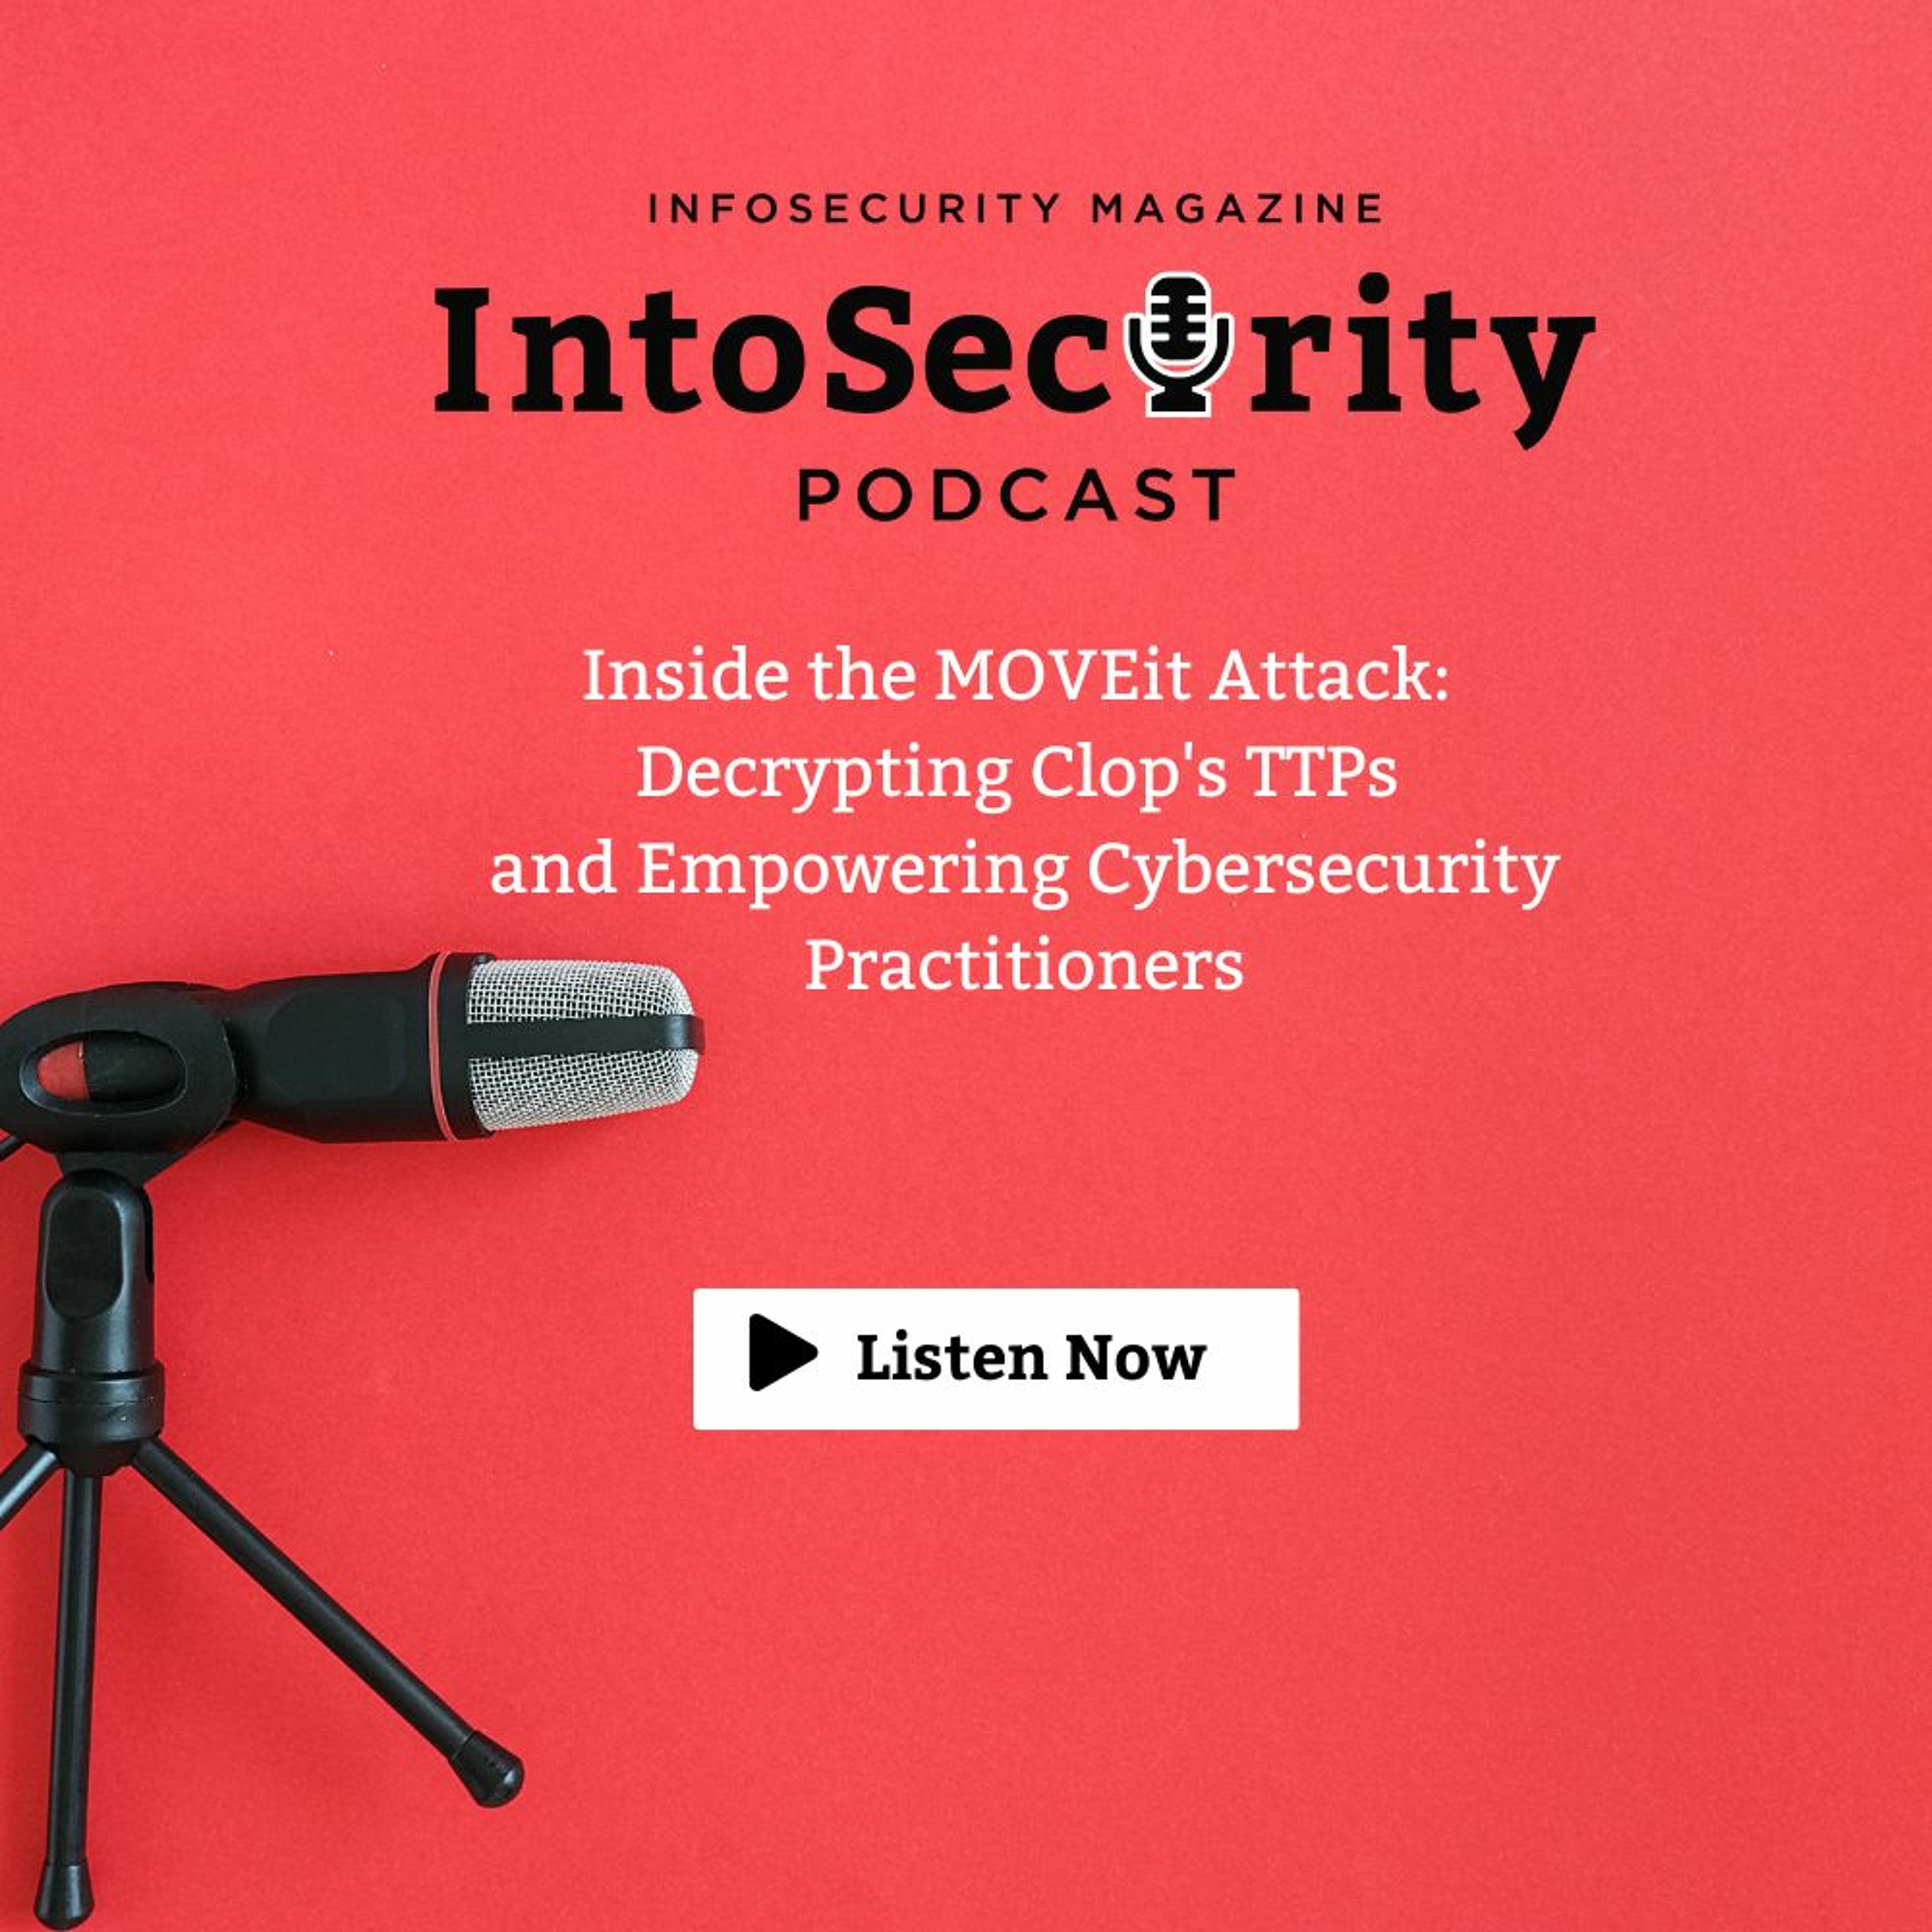 Inside the MOVEit Attack: Decrypting Clop's TTPs and Empowering Cybersecurity Practitioners